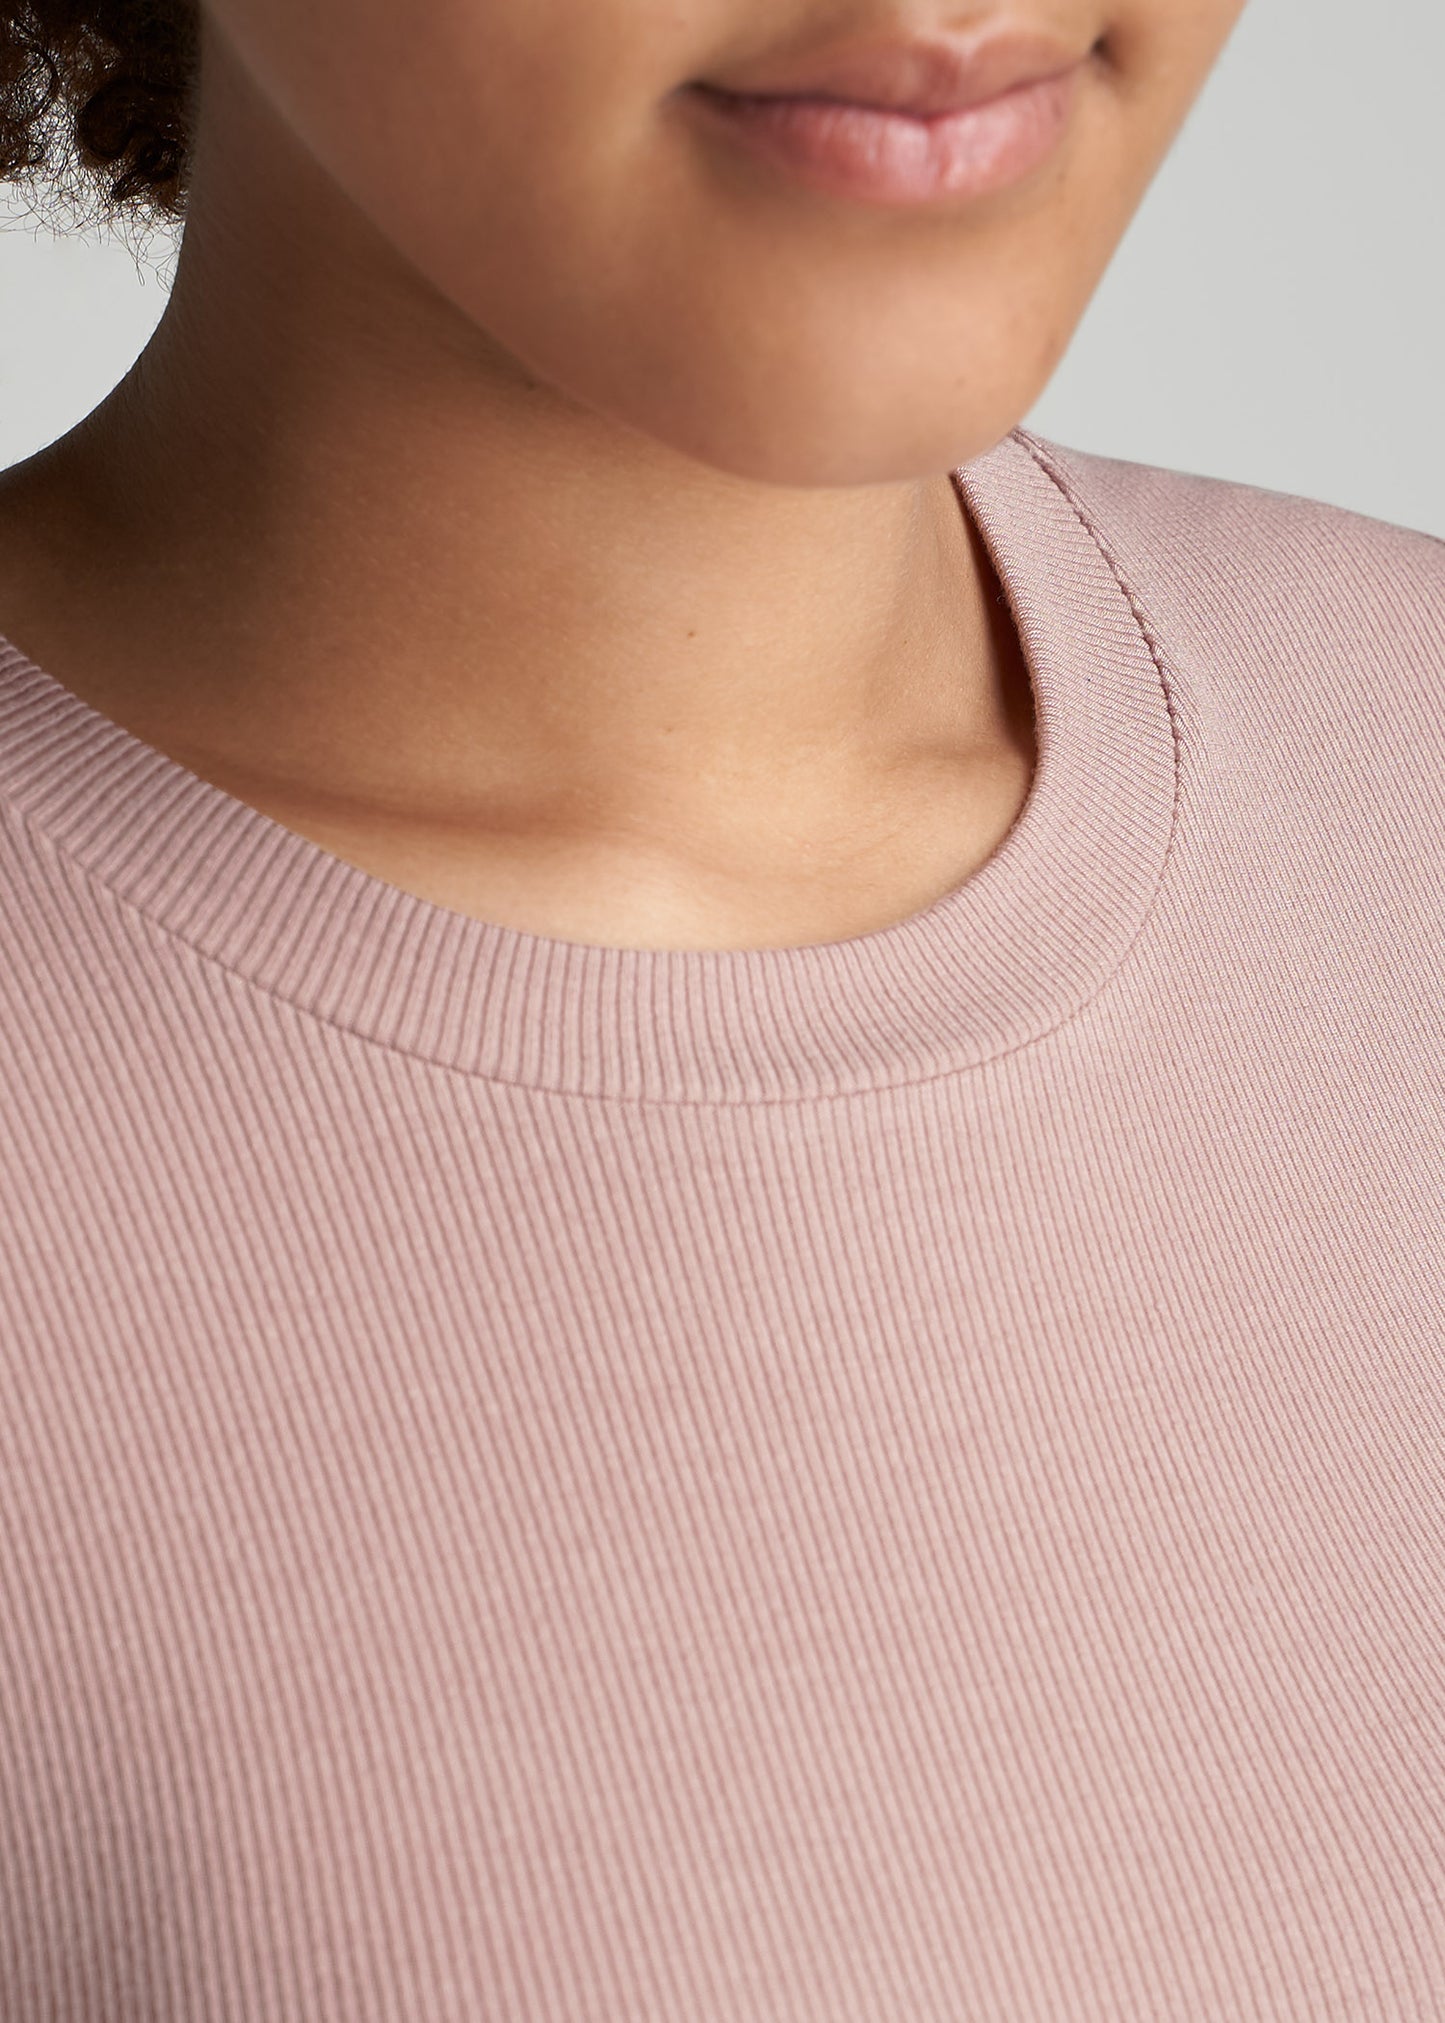 American-Tall-Women-Ribbed-Tee-BallerinaPink-detail